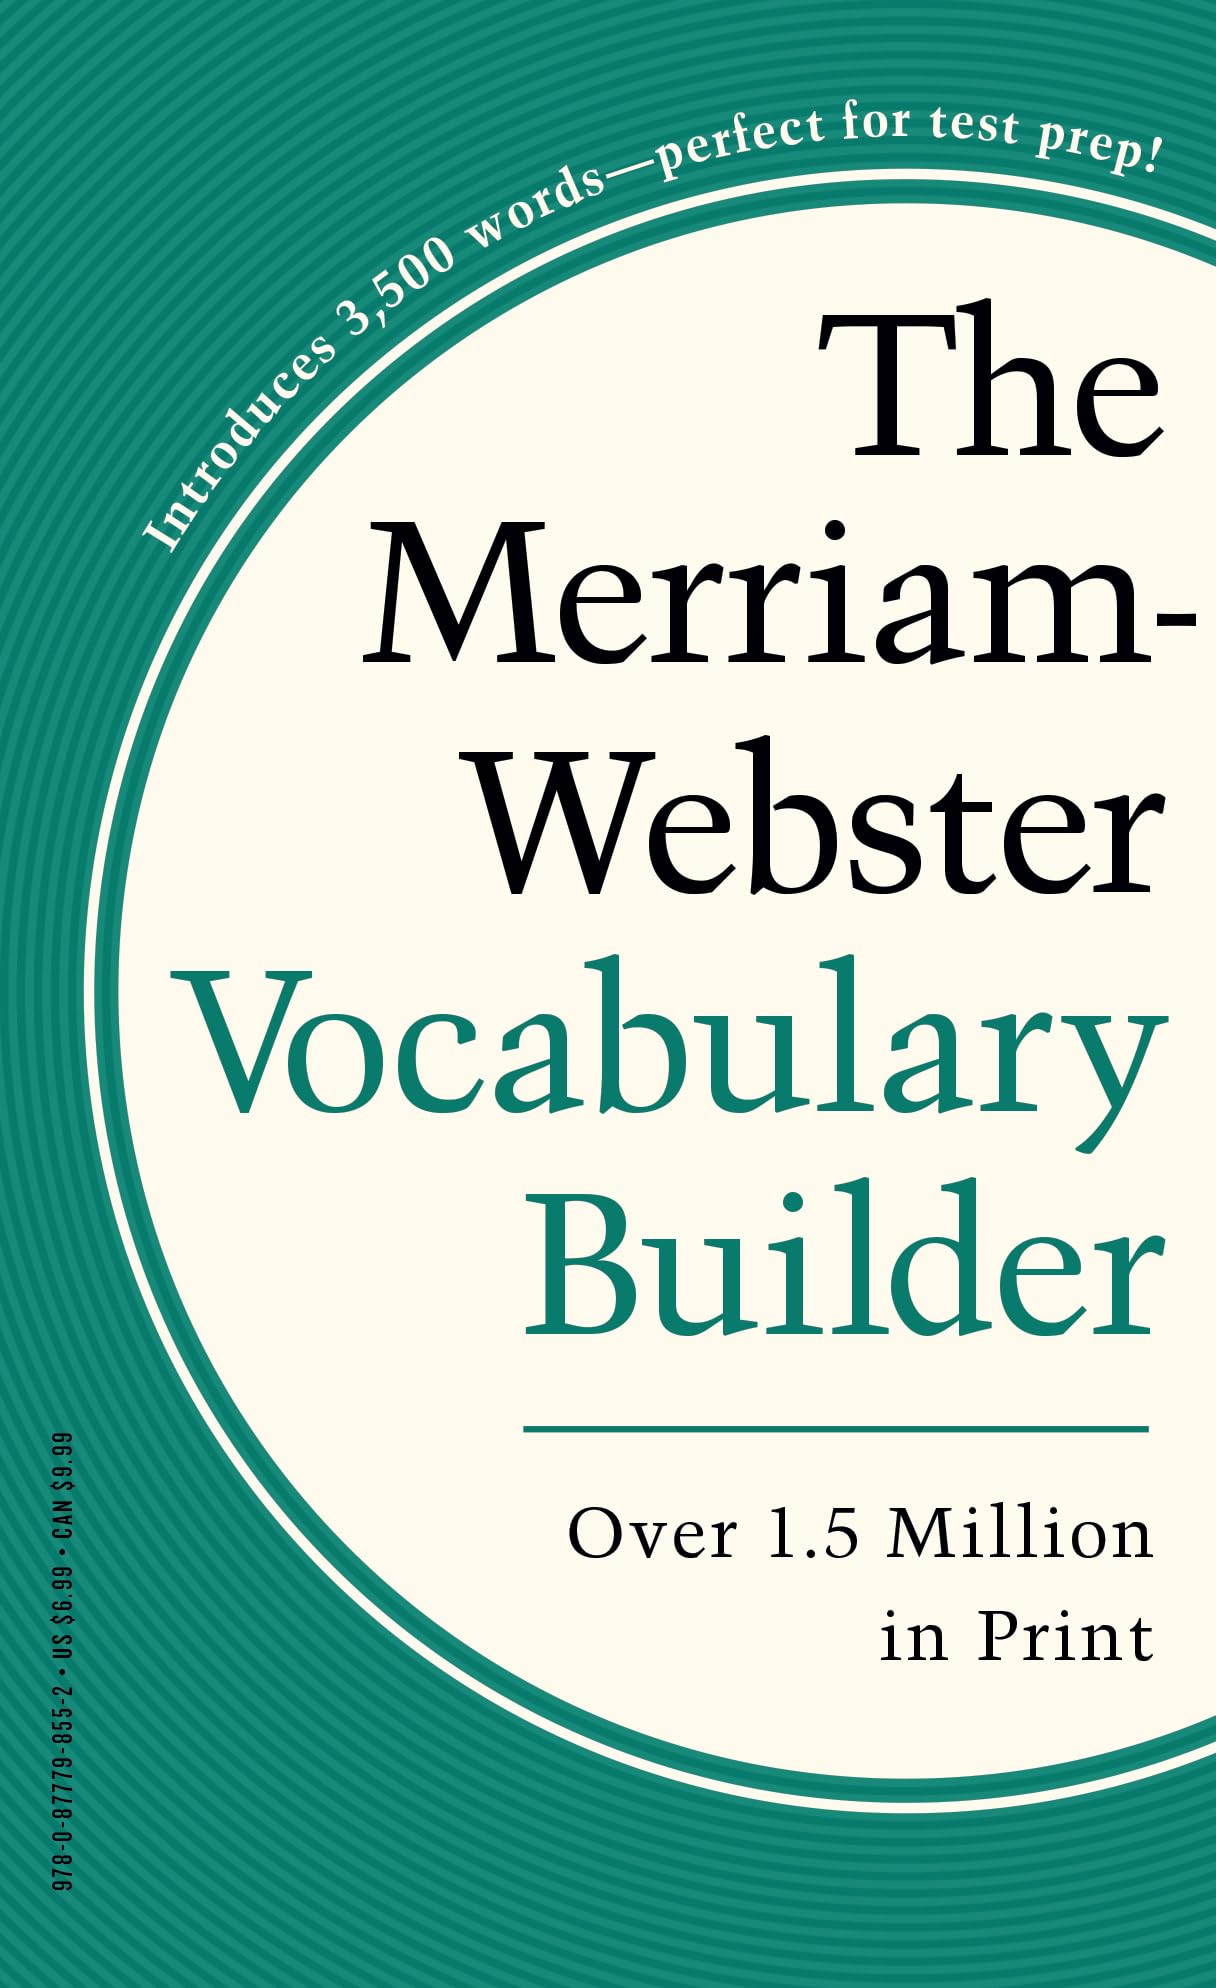 Merriam-Webster’s Vocabulary Builder | Perfect for prepping for SAT, ACT, TOEFL, & TOEIC